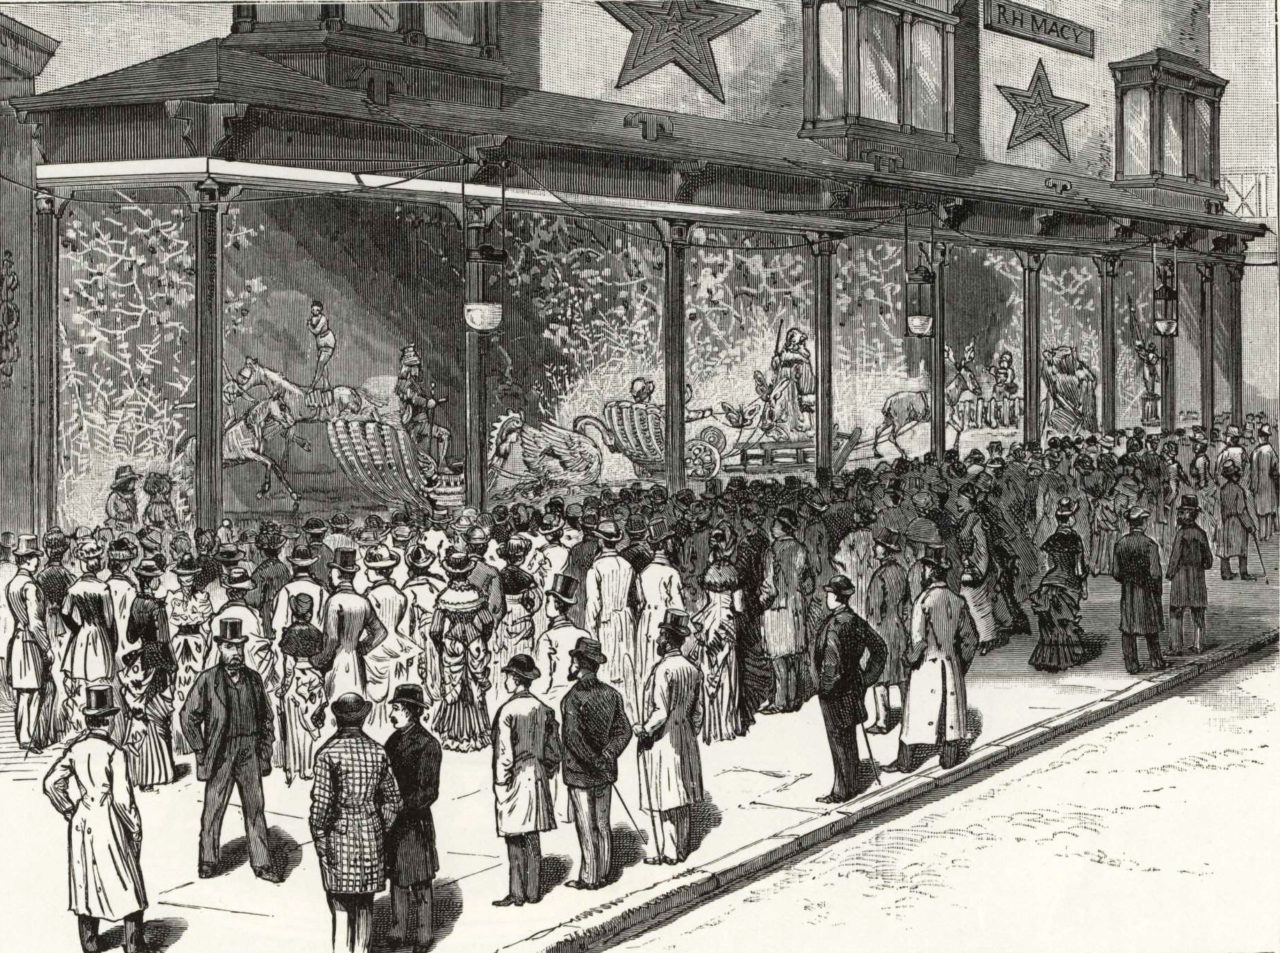 An early rendering of an animated display at R.H. Macy’s in New York City